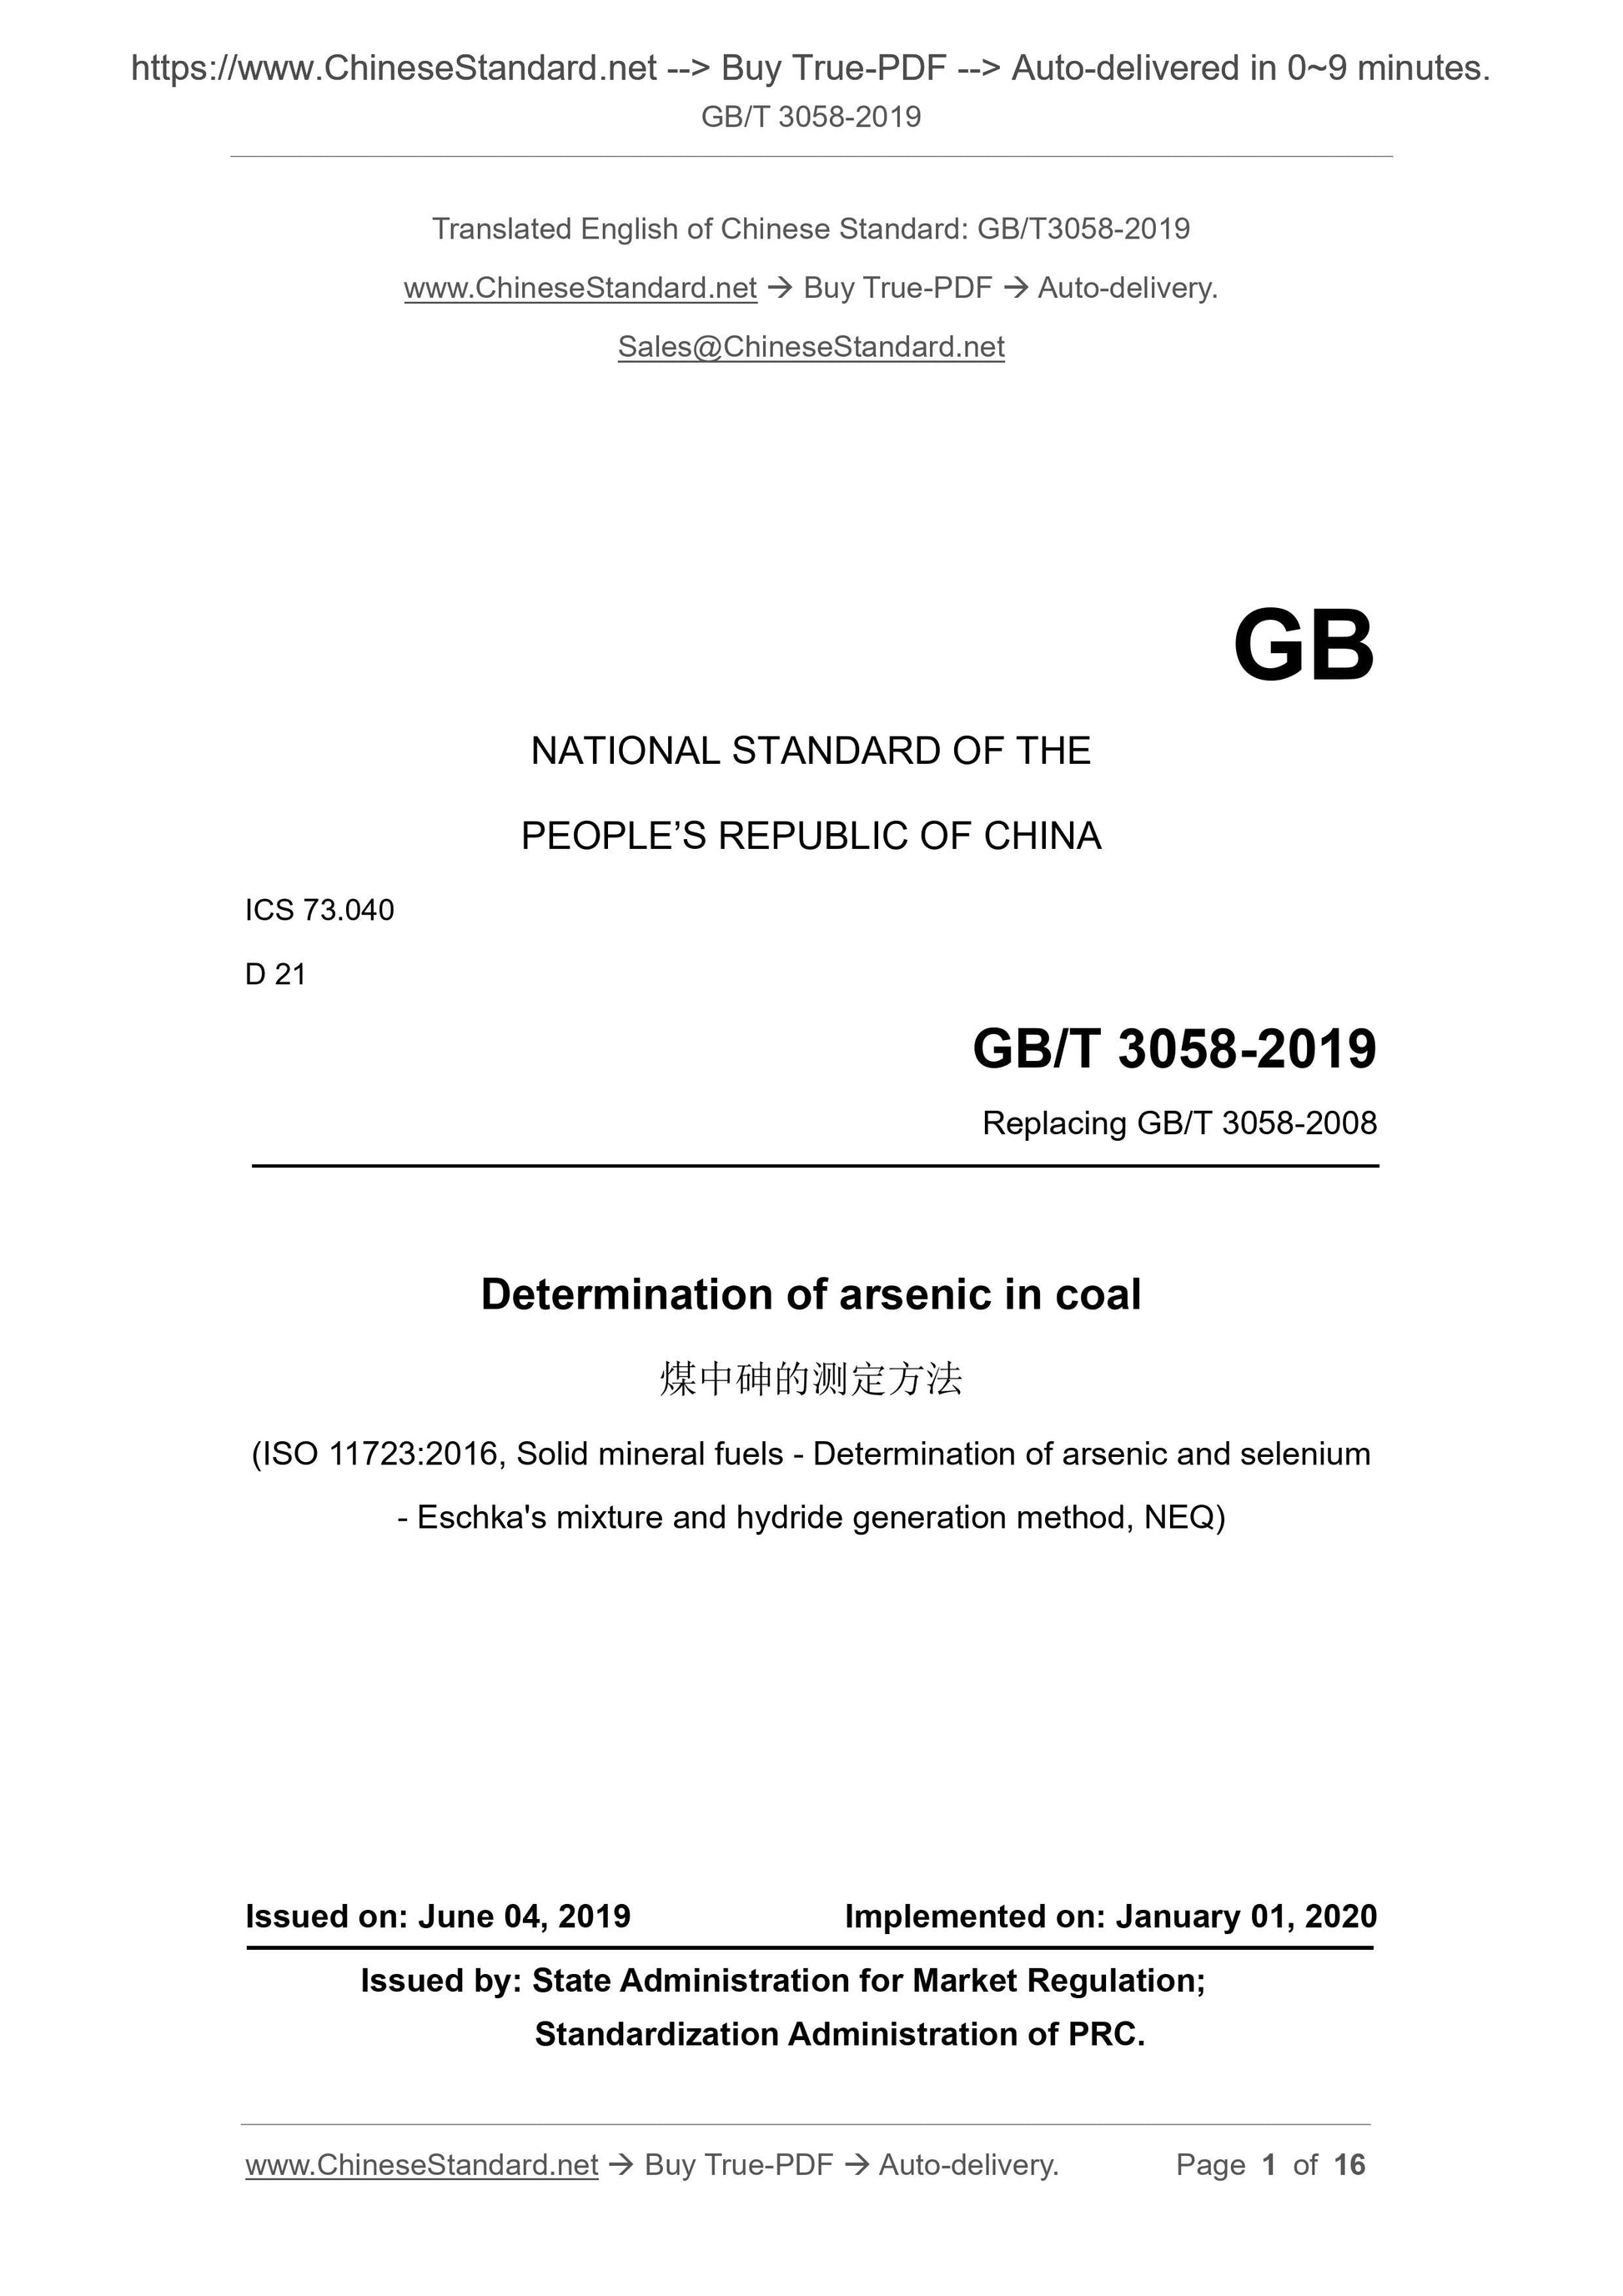 GB/T 3058-2019 Page 1